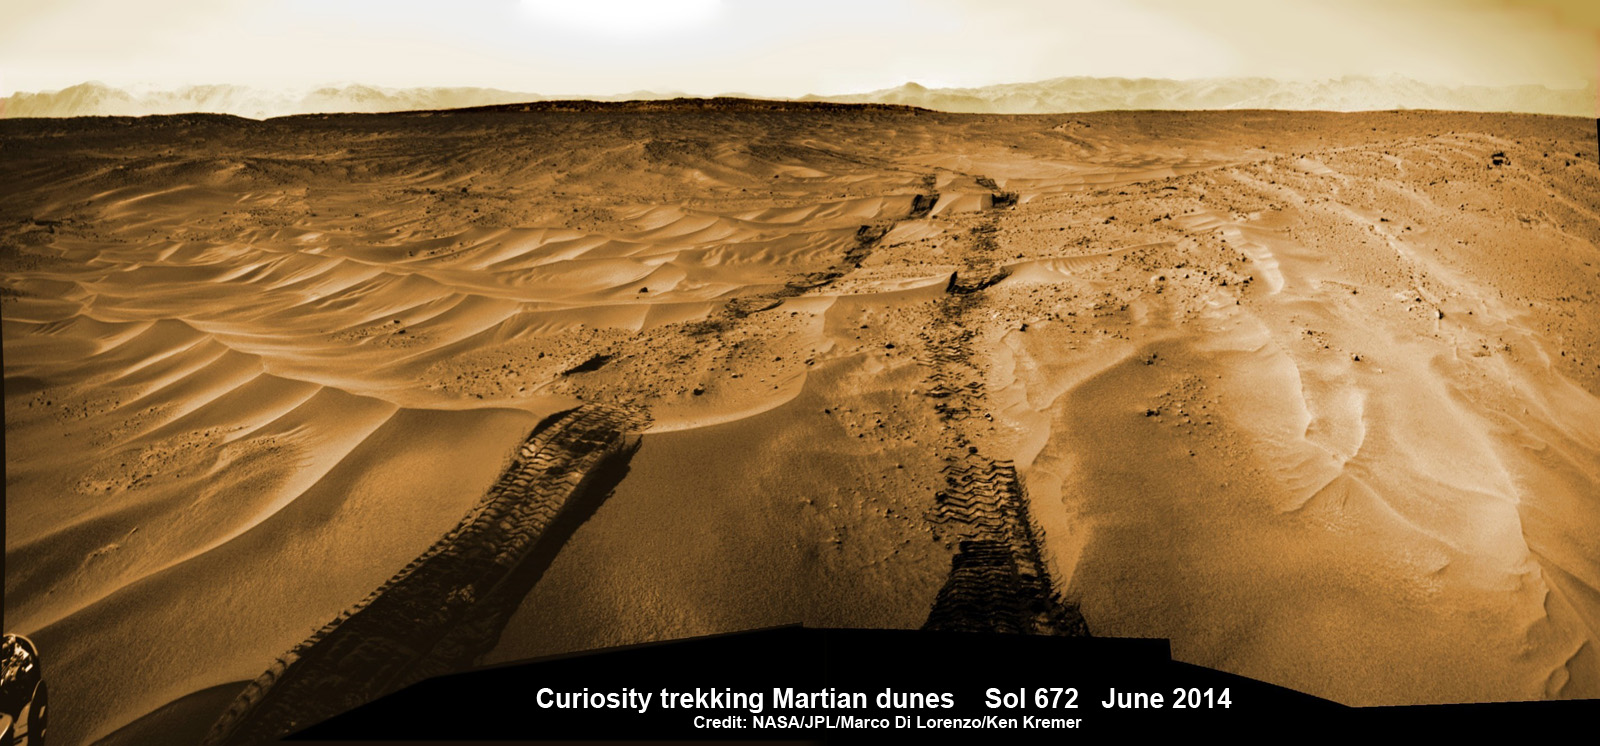 Curiosity treks across Martian dunes and drives outside landing ellipse here, in this photo mosaic view captured on Sol 672, June 27, 2014. Distant eroded rim of Gale Crater seen in background. Navcam camera raw images stitched and colorized. Credit: NASA/JPL-Caltech/Marco Di Lorenzo/Ken Kremer – kenkremer.com